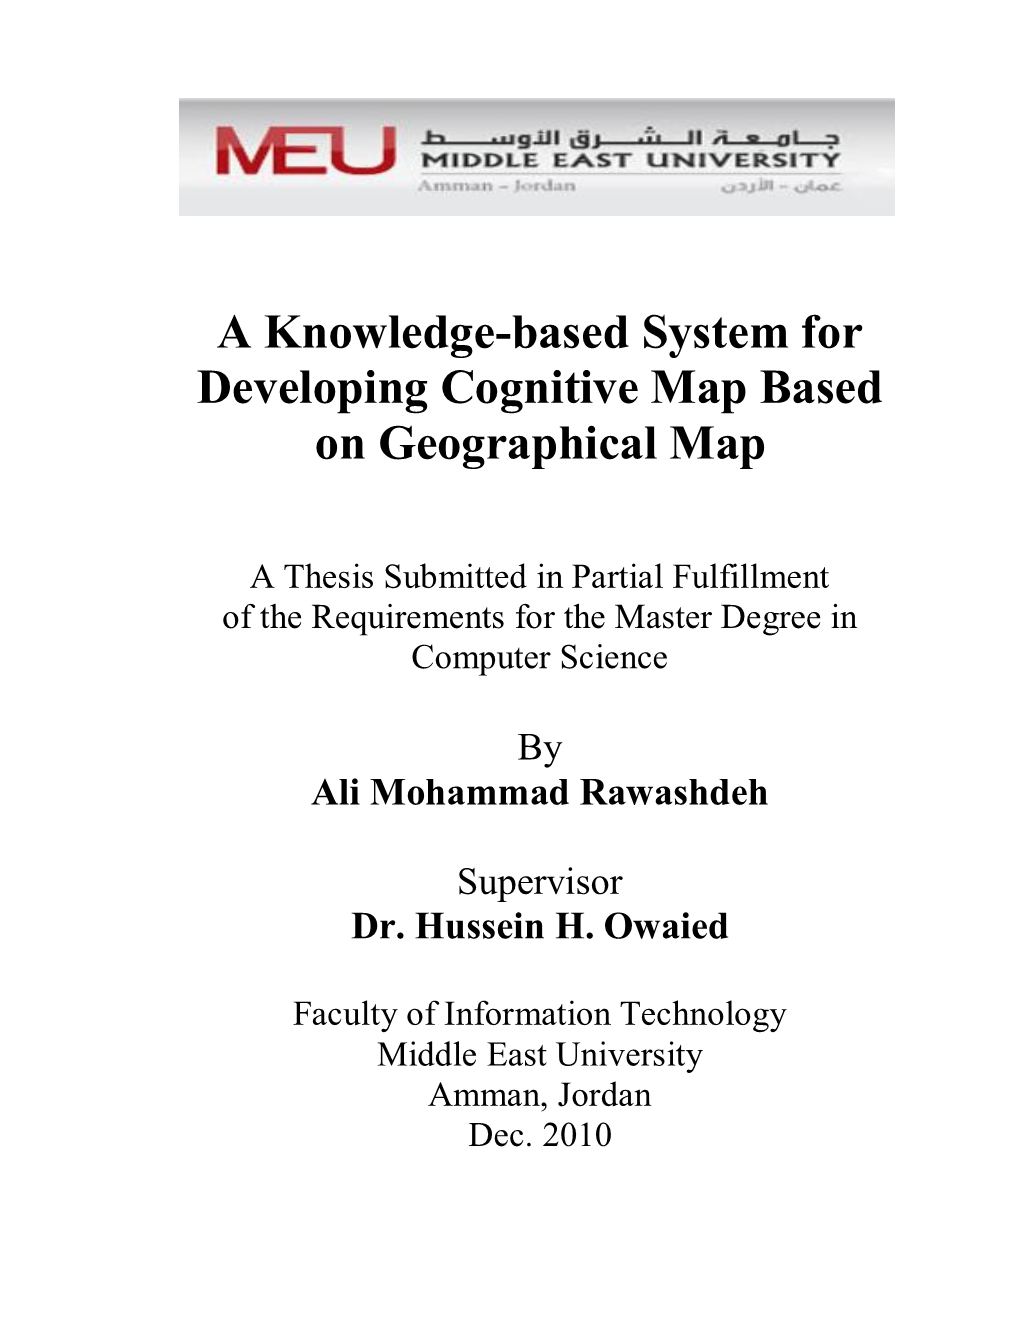 A Knowledge-Based System for Developing Cognitive Map Based on Geographical Map